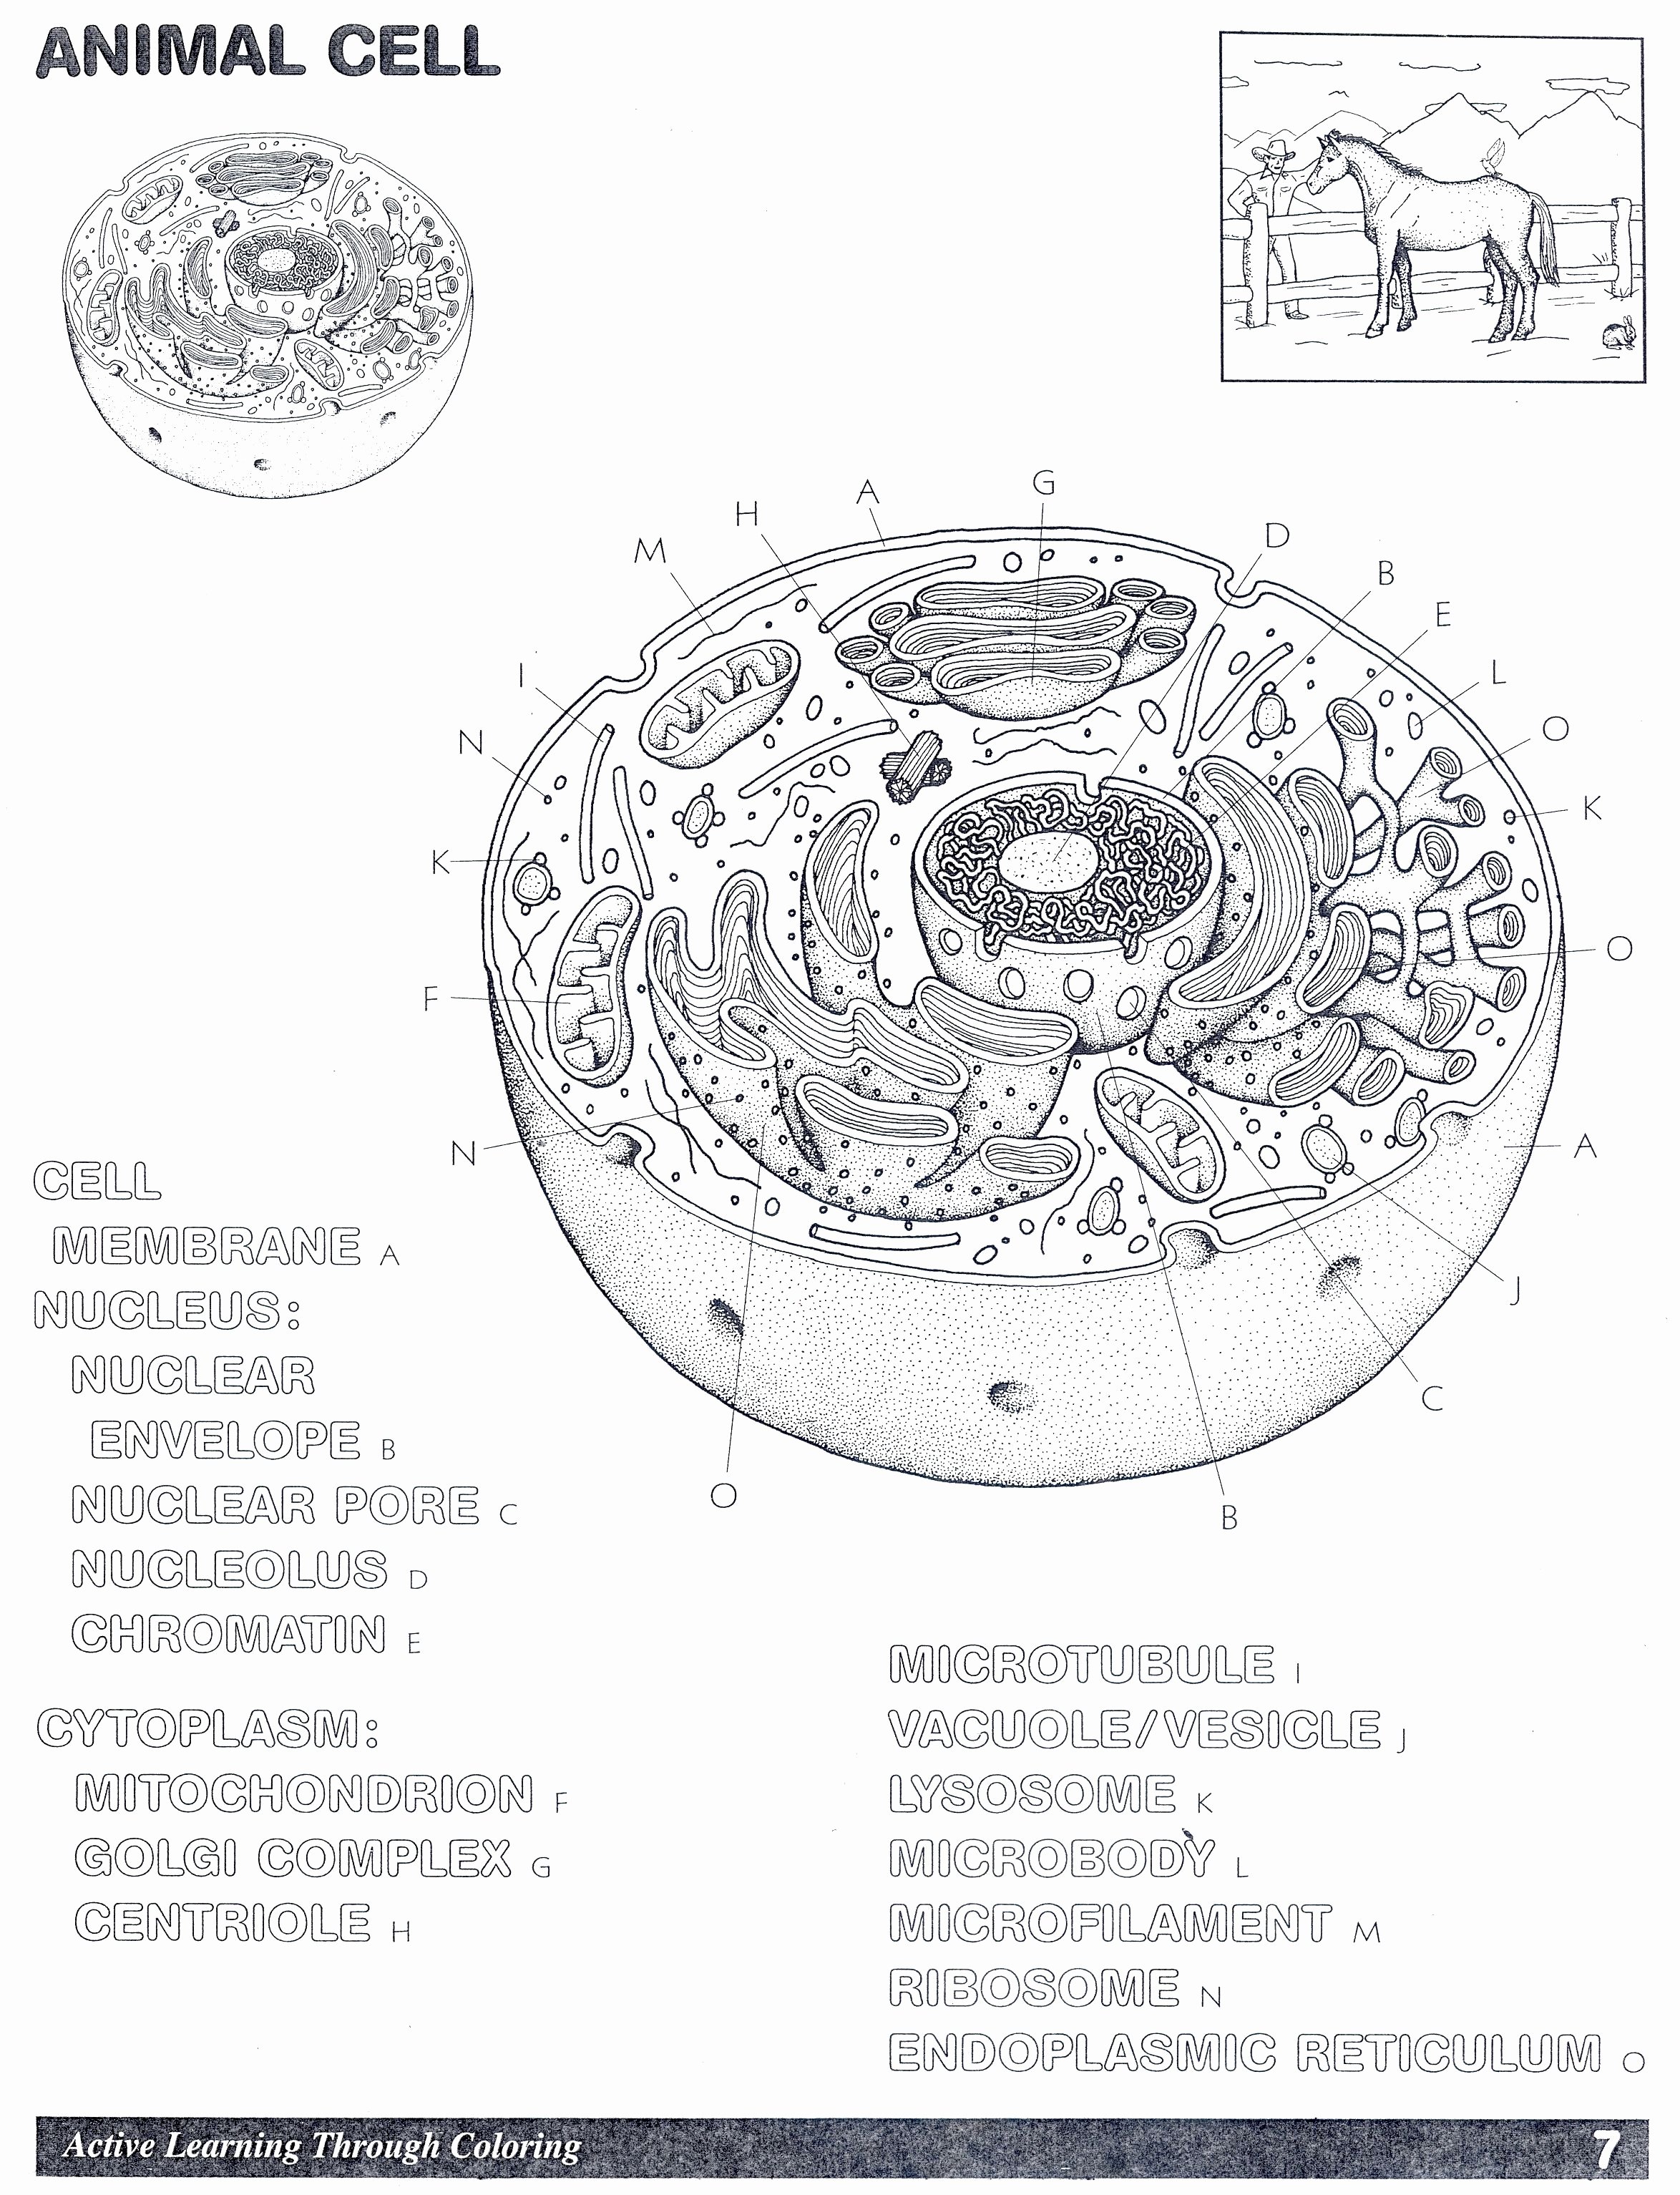 Animal Cell Coloring Worksheet Awesome Animal Cell Coloring Worksheet Answers Coloring Pages